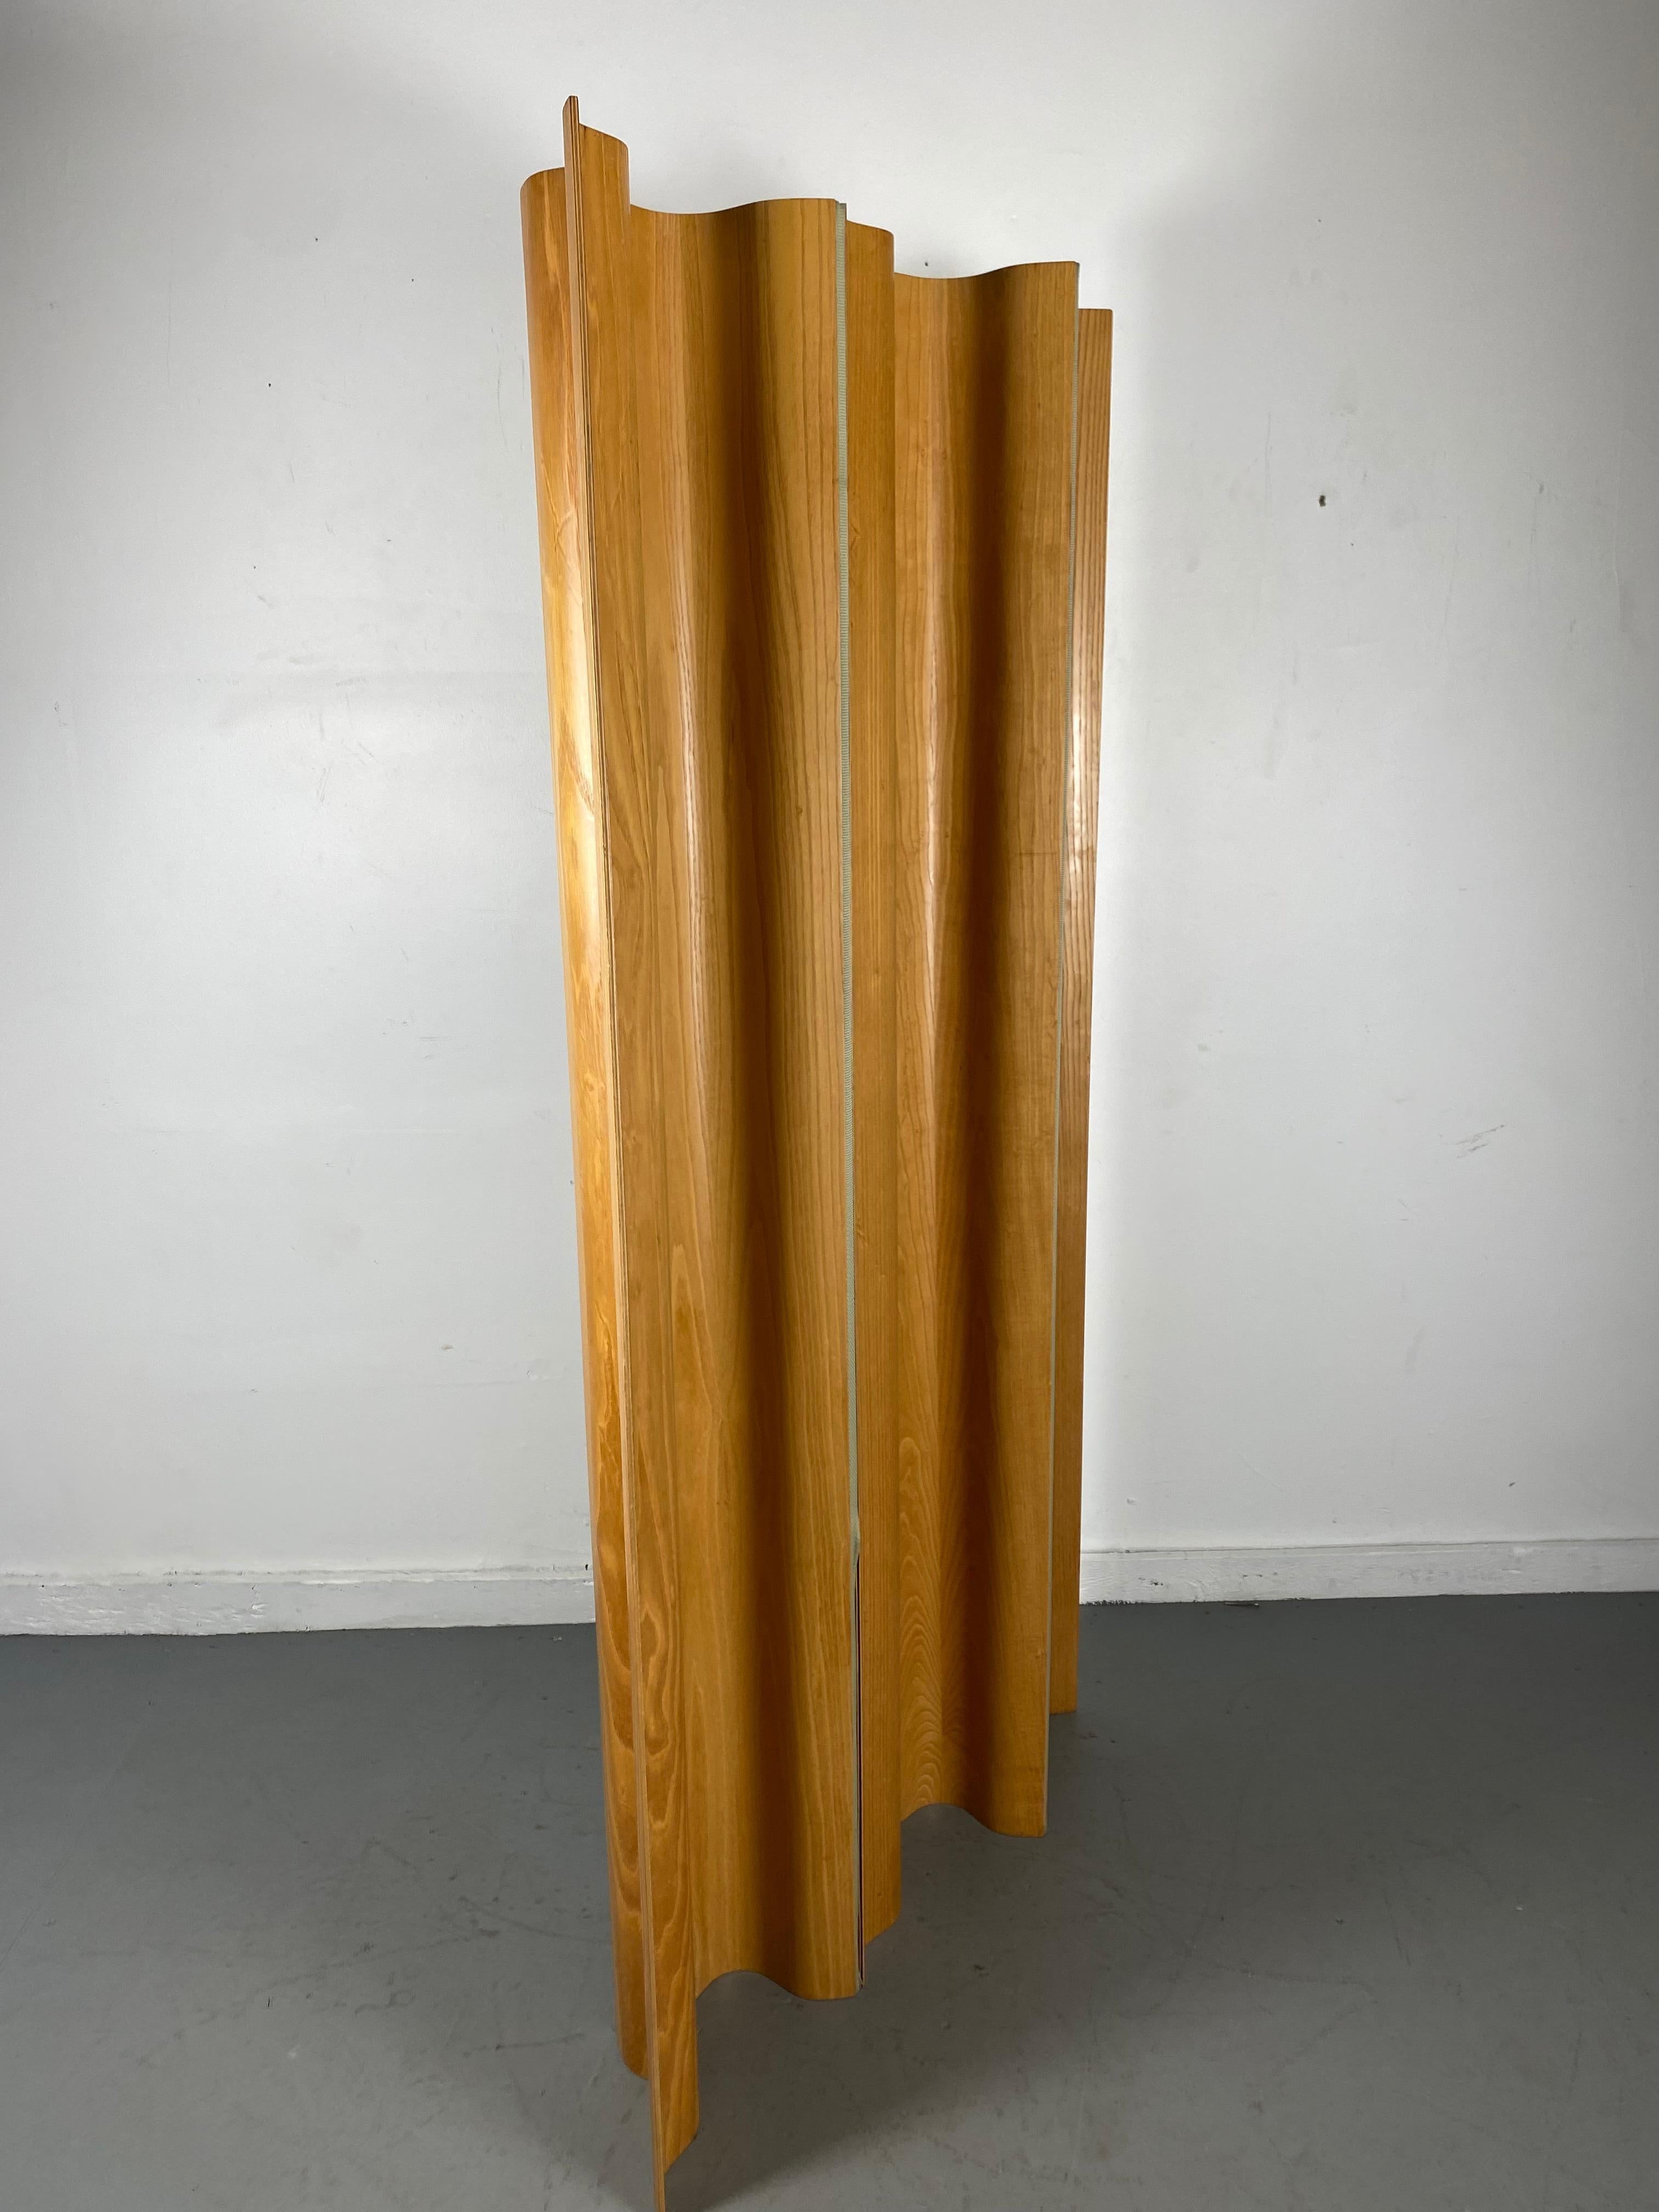 American Charles and Ray Eames Plywood Folding Screen / Divider, , F S 6, , , Herman Miller